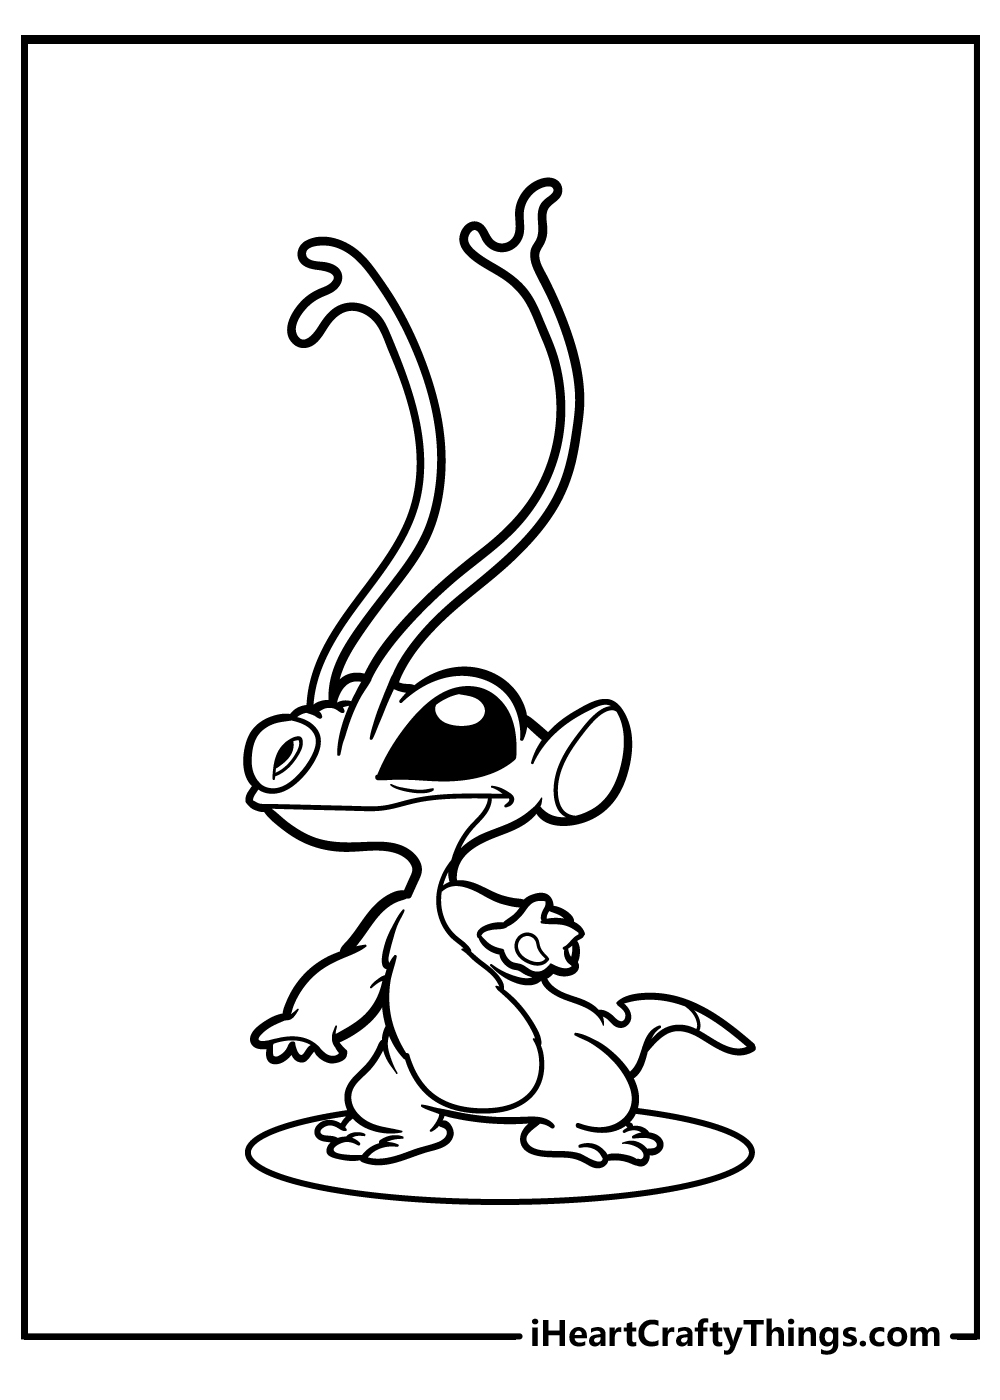 black and white stitch coloring sheets for kids